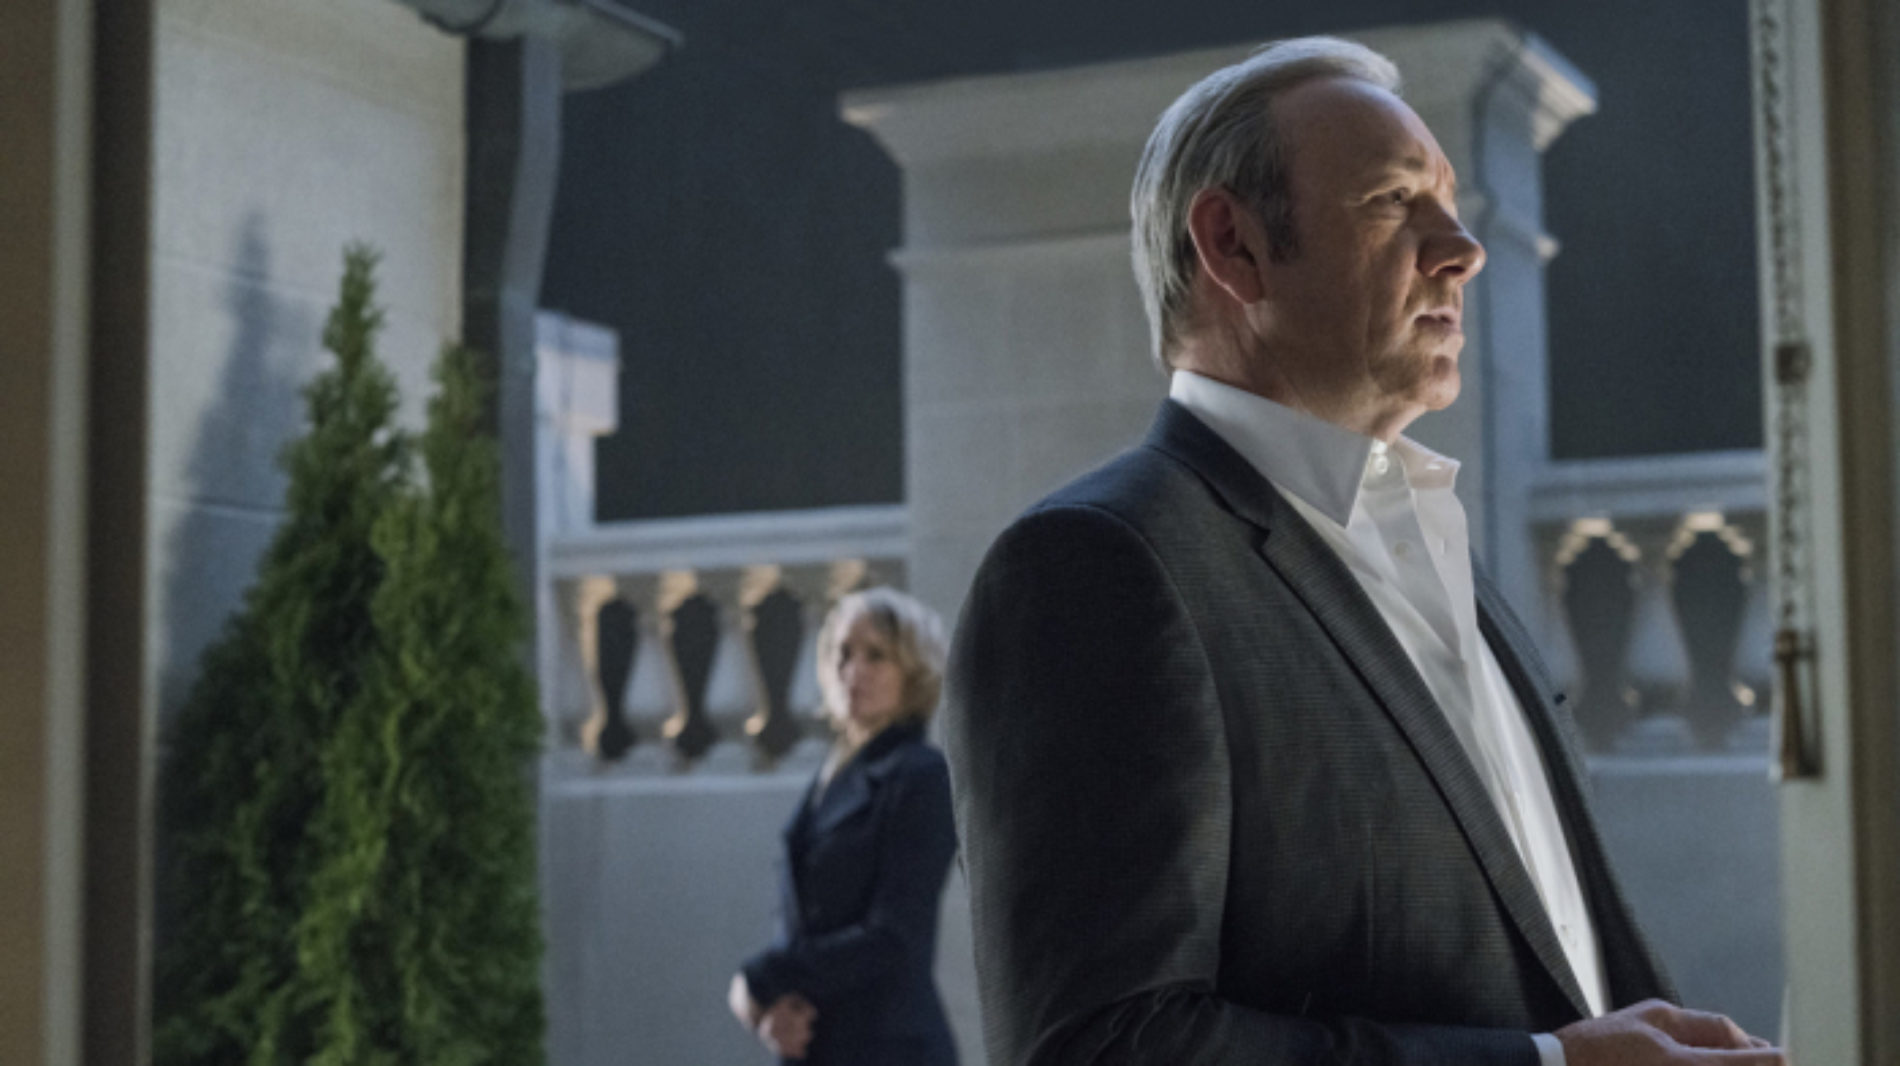 Netflix may have Kevin Spacey’s Frank Underwood killed off in ‘House of Cards’ as actor is fired from the series